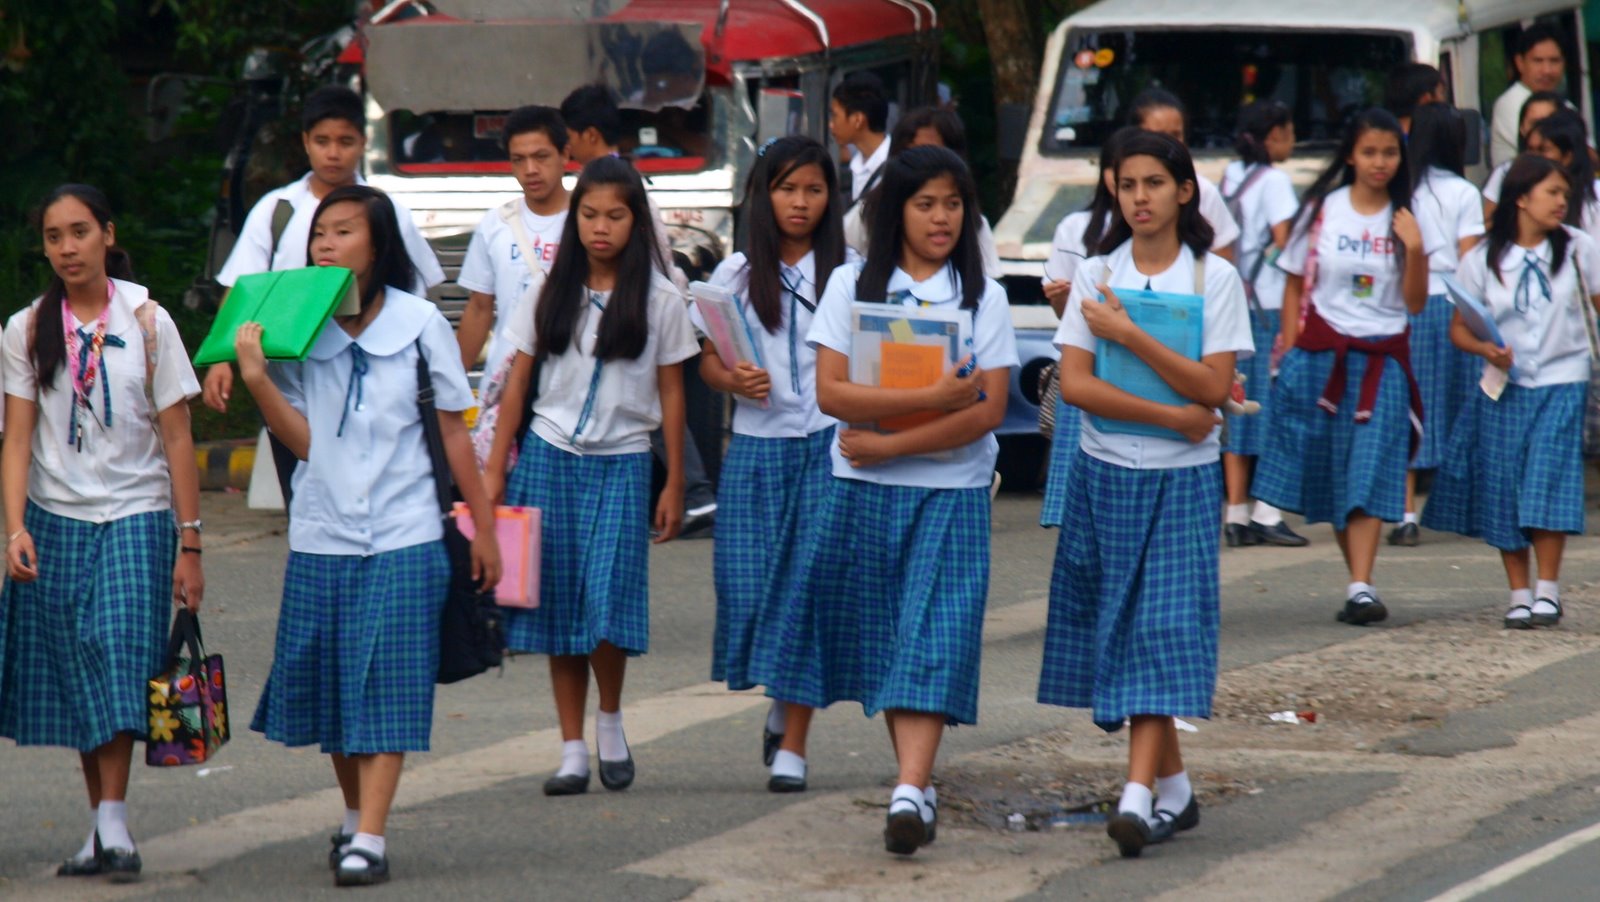 research topics about senior high school in the philippines